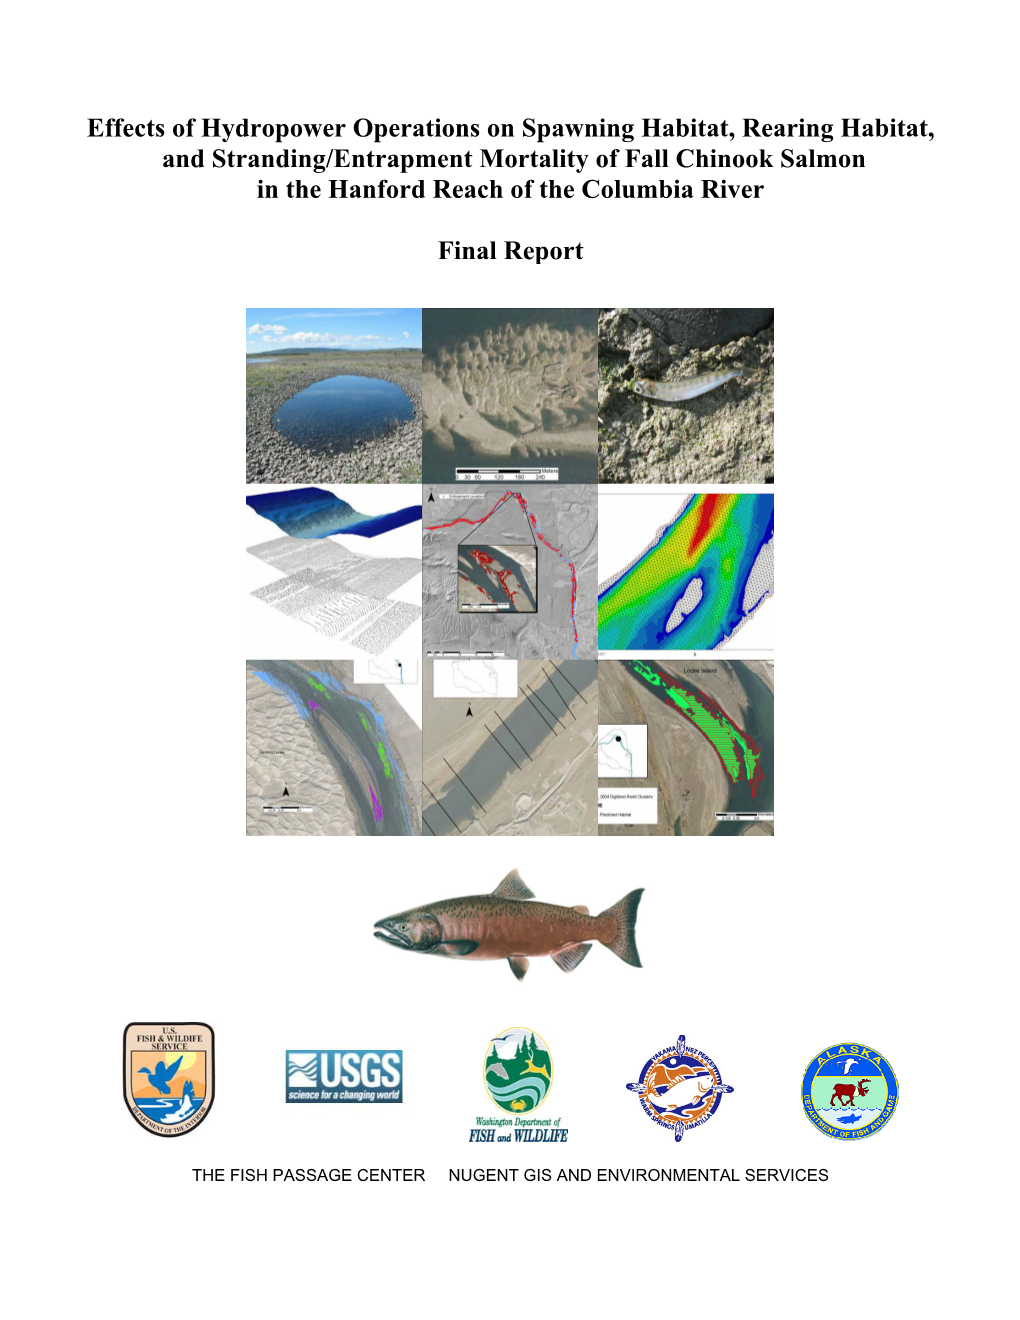 Effects of Hydropower Operations on Spawning Habitat, Rearing Habitat, and Stranding/Entrapment Morta Lity of Fall Chinook Salmon